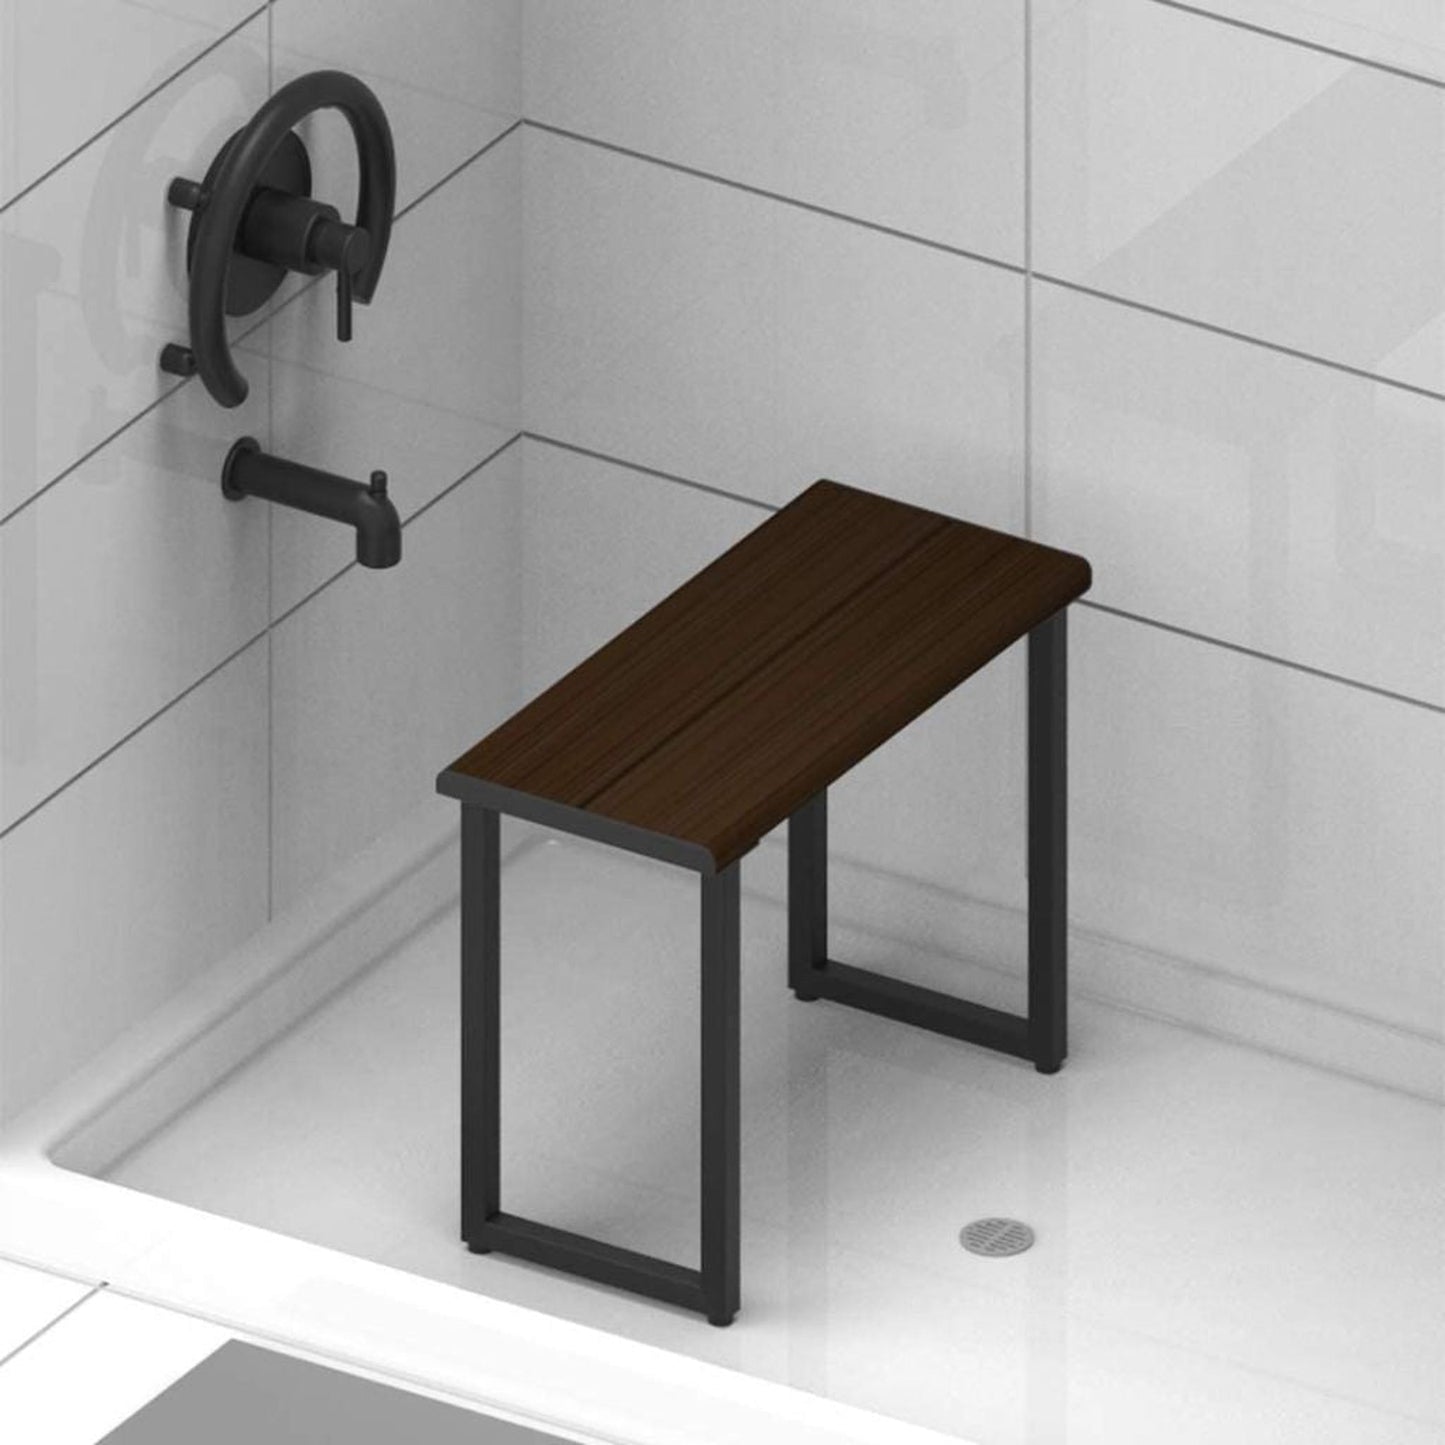 Invisia 24" Rectangle Ash Stained Bamboo Freestanding Shower Bench With Chrome Frame